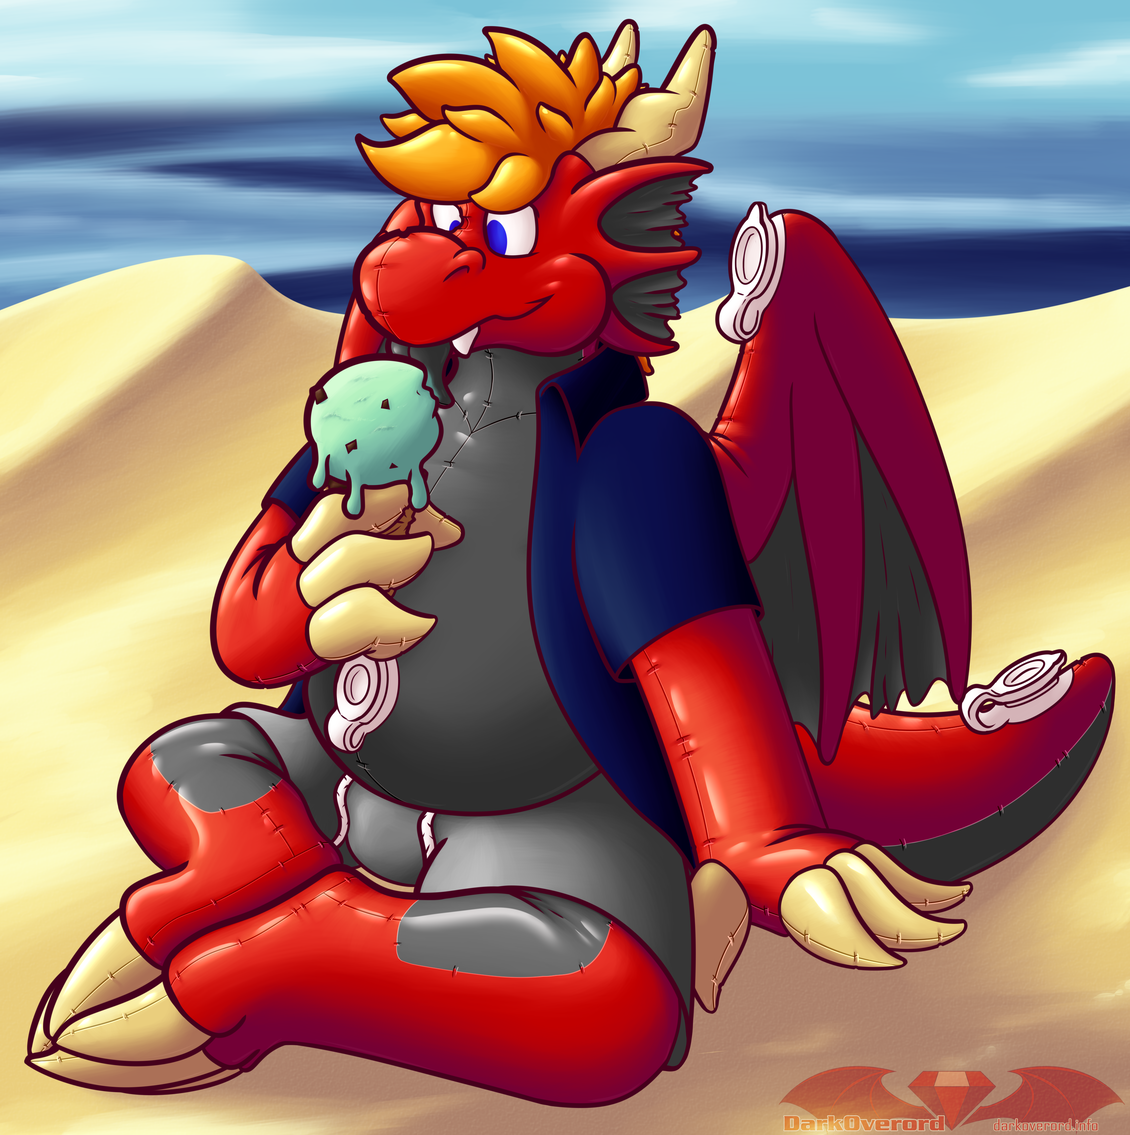 DarkOverord, an inflatable red dragon toy, sitting on the beach with its legs posed so its feet are pressed against one-another.

It is lapping happily at a mint-choc-chip ice cream (even if it can't "eat")